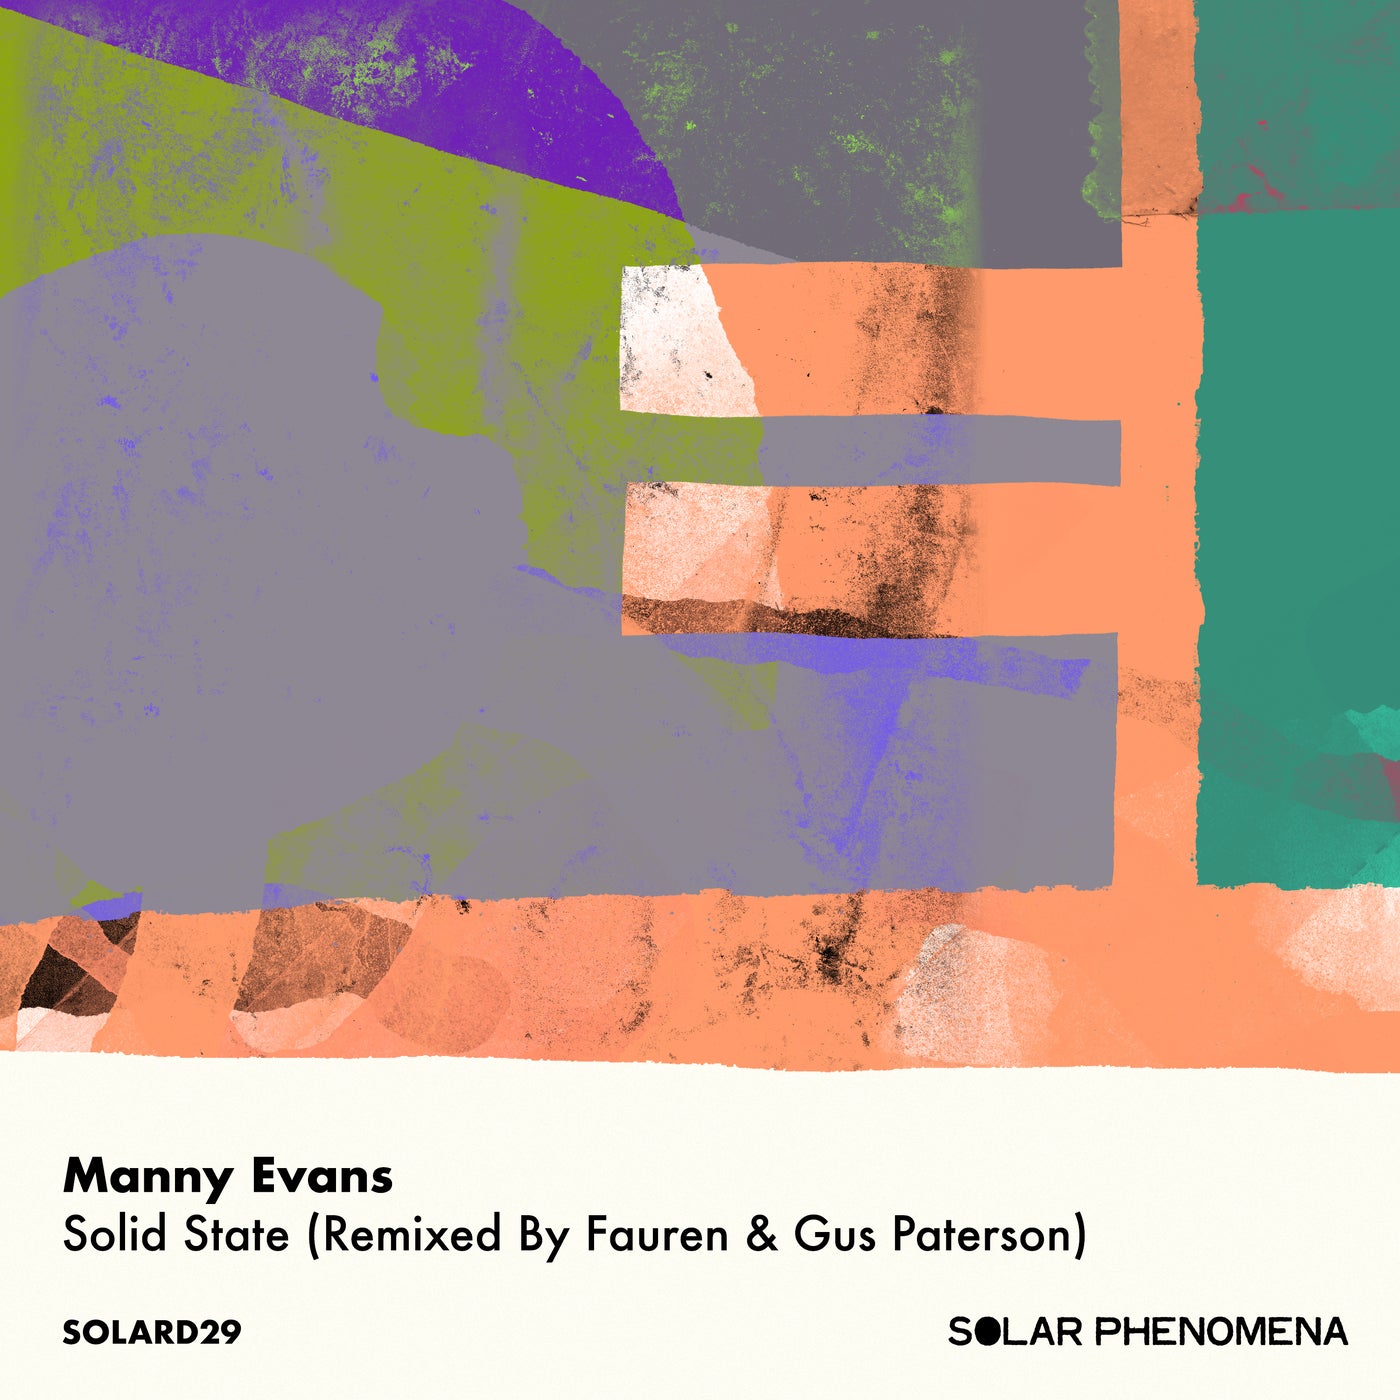 Solid State (Remixed By Fauren & Gus Paterson)